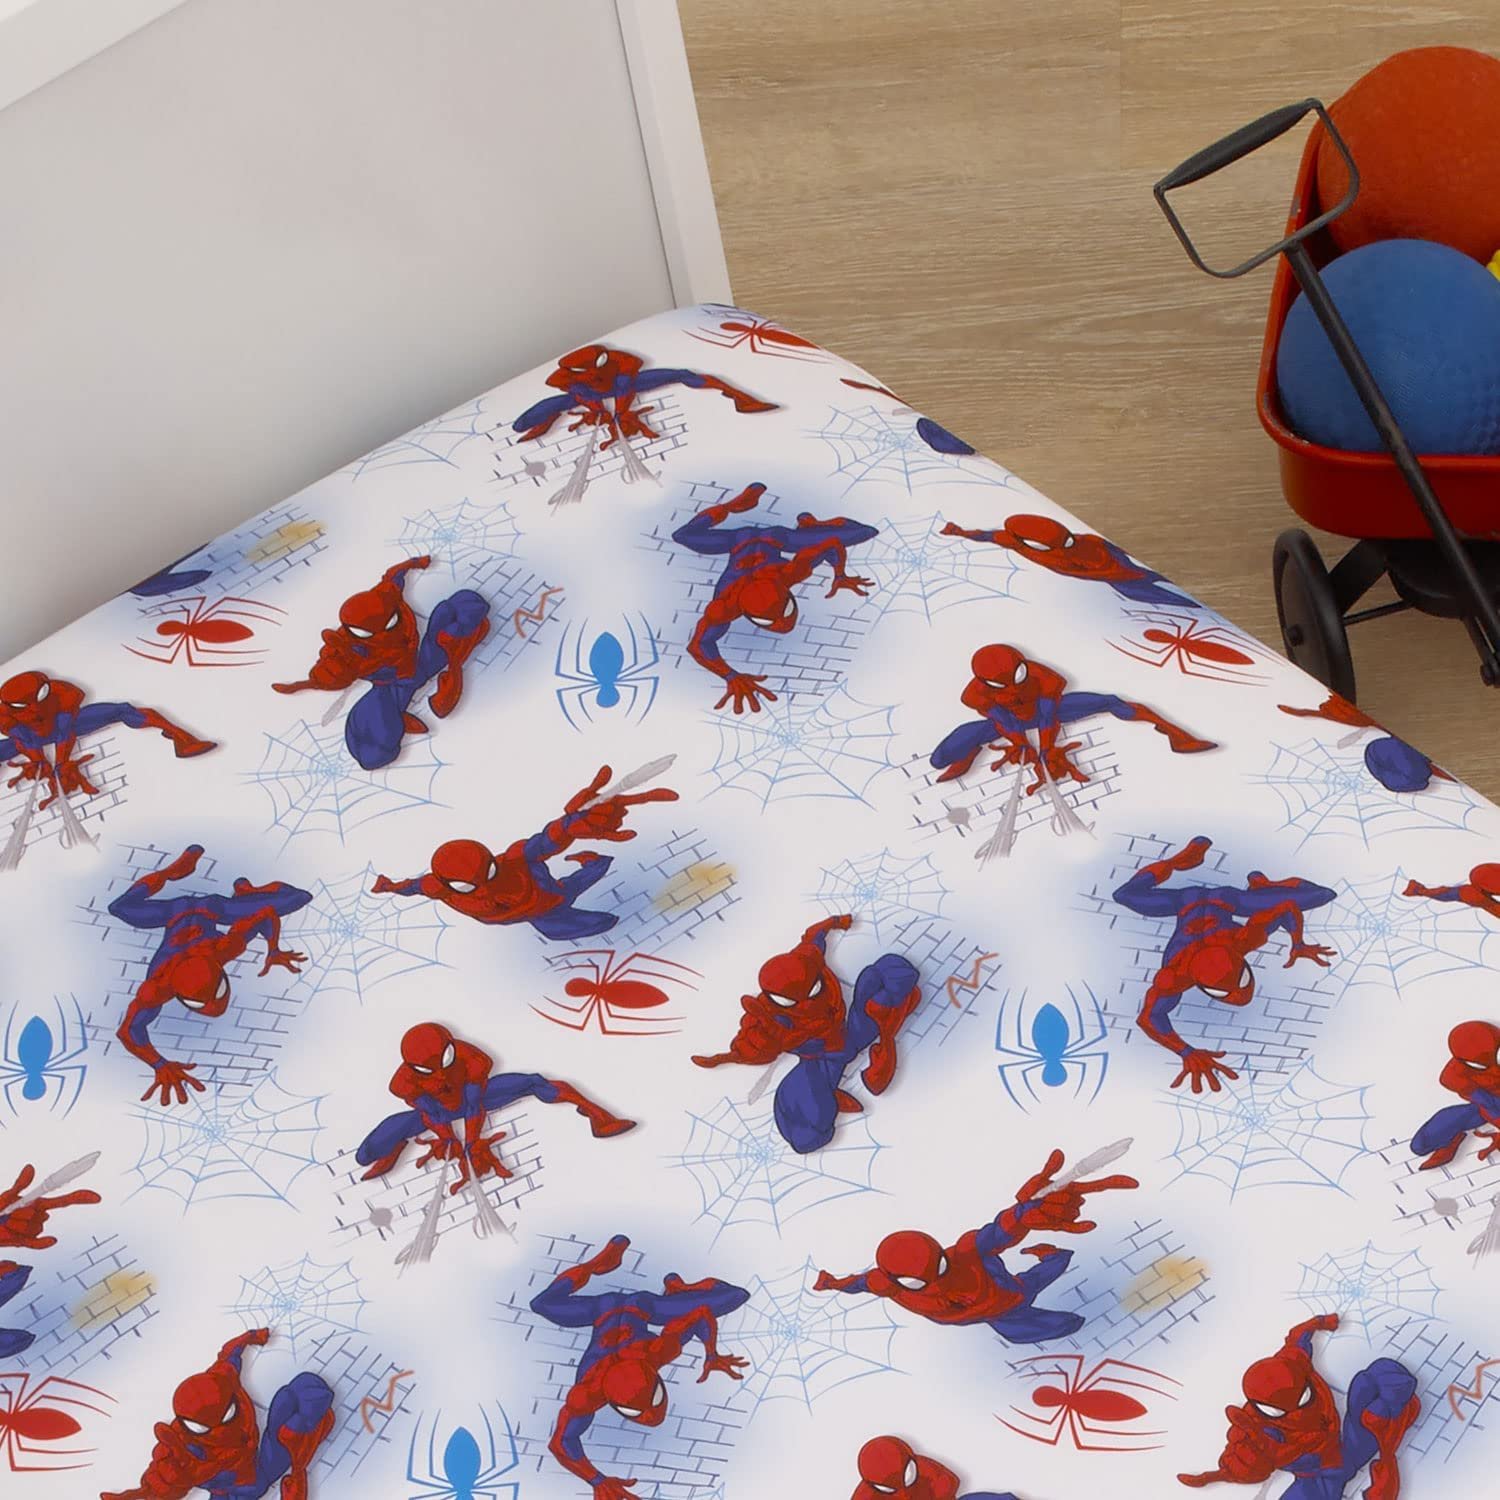 Marvel Spiderman Fitted Crib Sheet 100% Soft Microfiber, Baby Sheet, Fits Standard Size Crib Mattress 28in x 52in - image 3 of 4